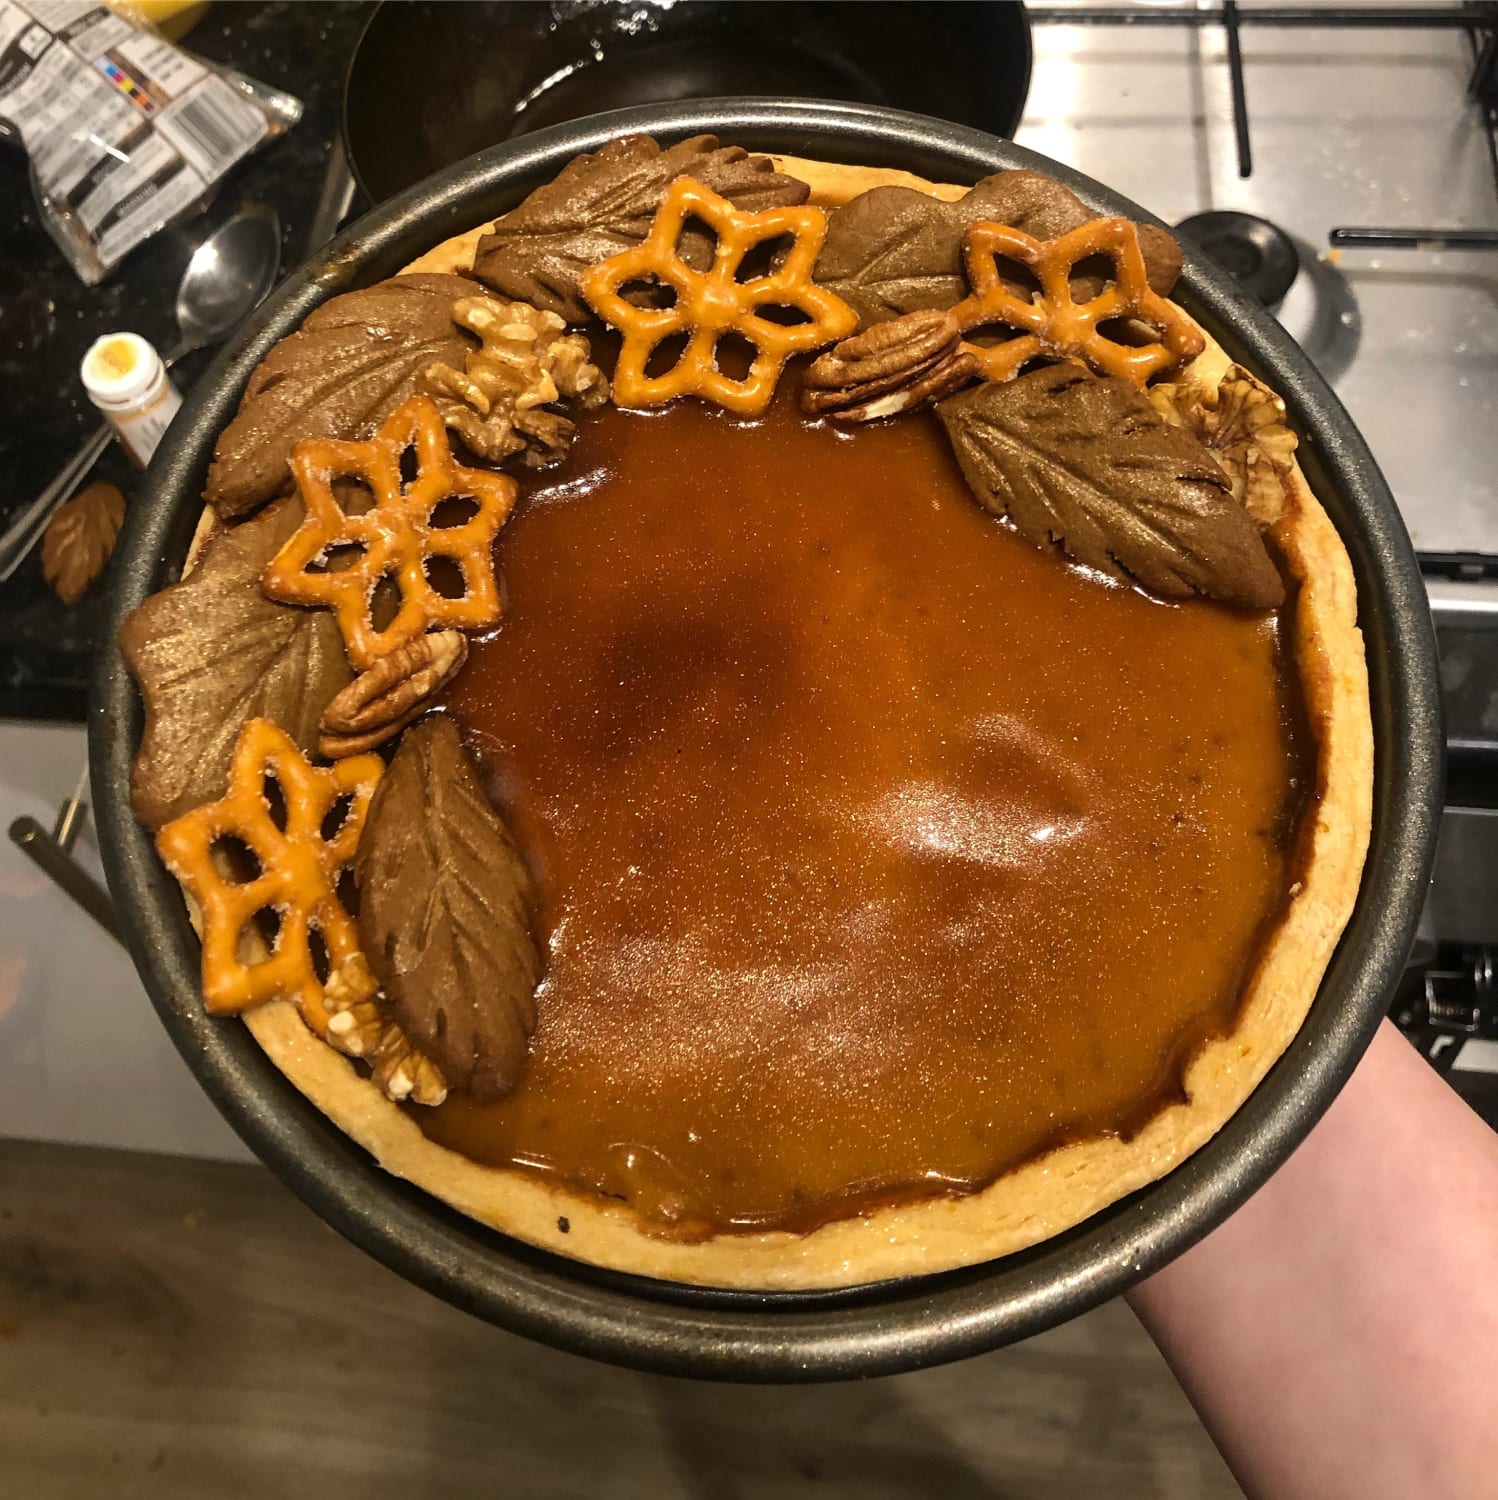 [pro/chef] Salted caramel pumpkin pie with gingerbread foliage, pretzels and glitter